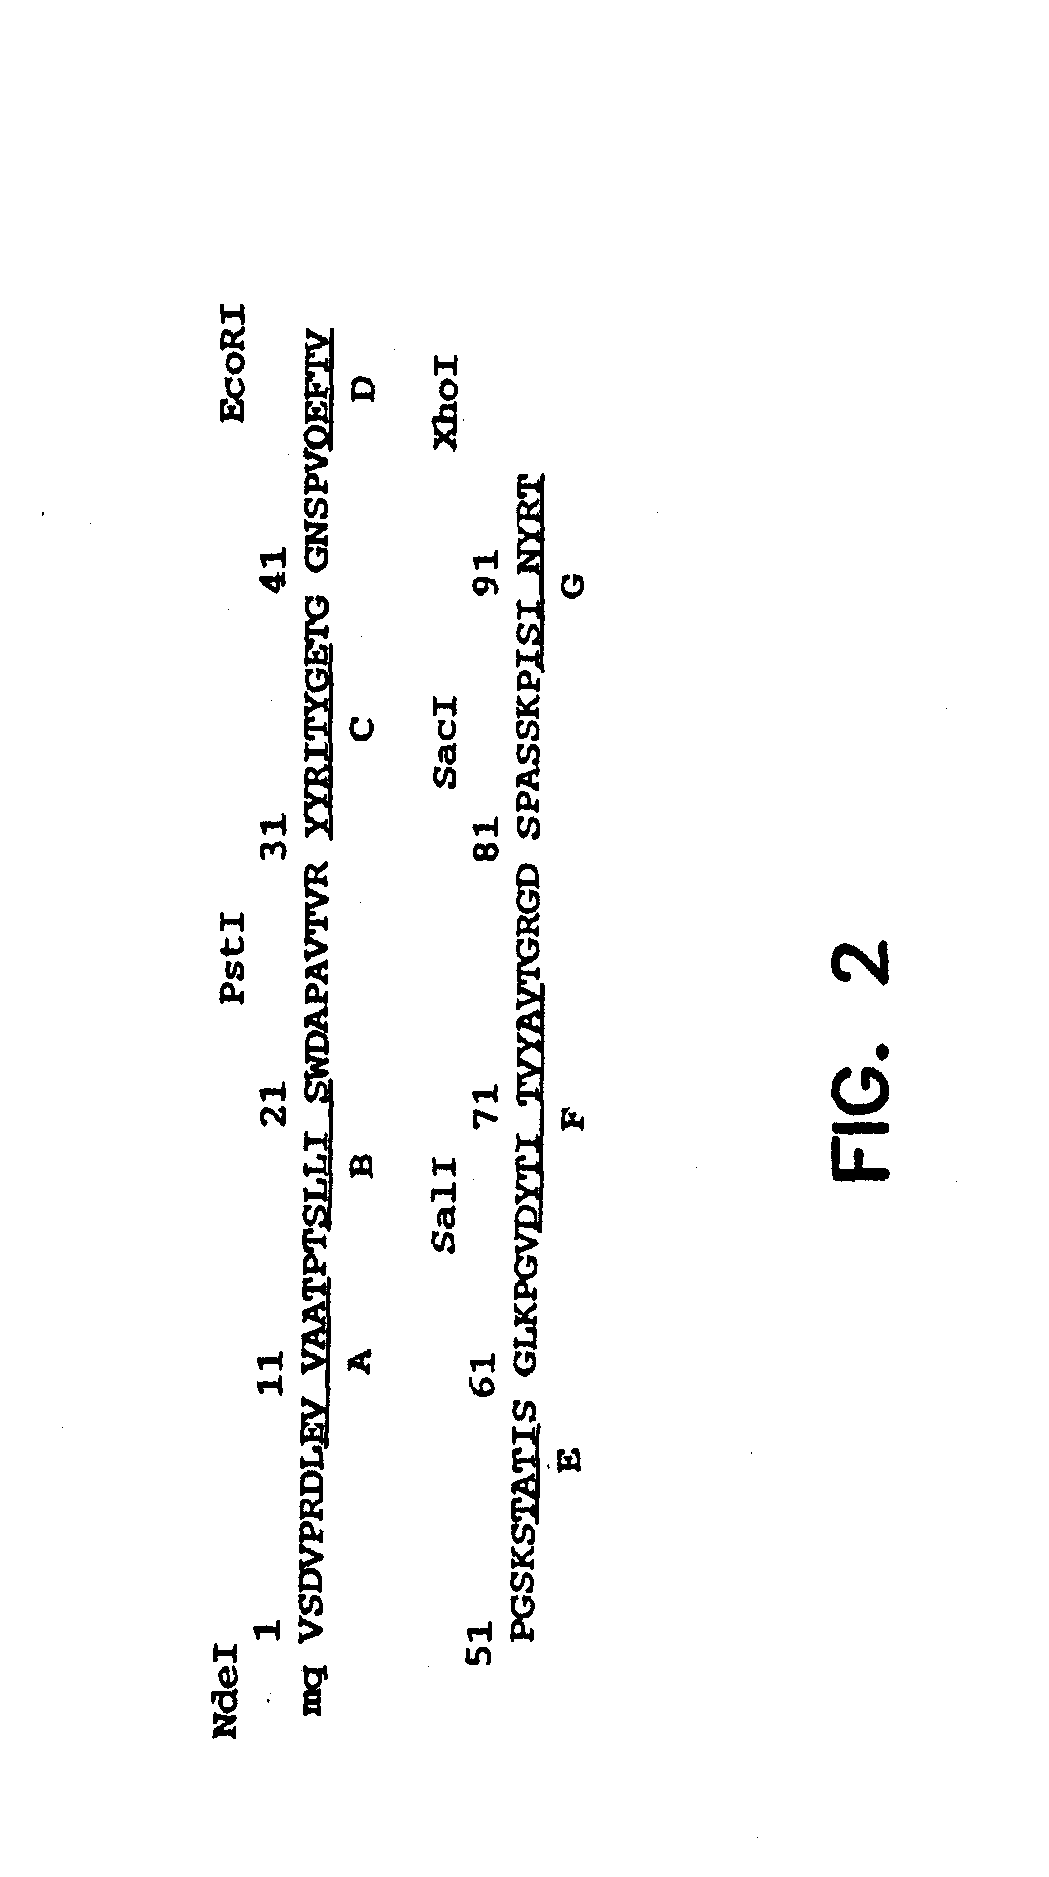 Reconstituted polypeptides